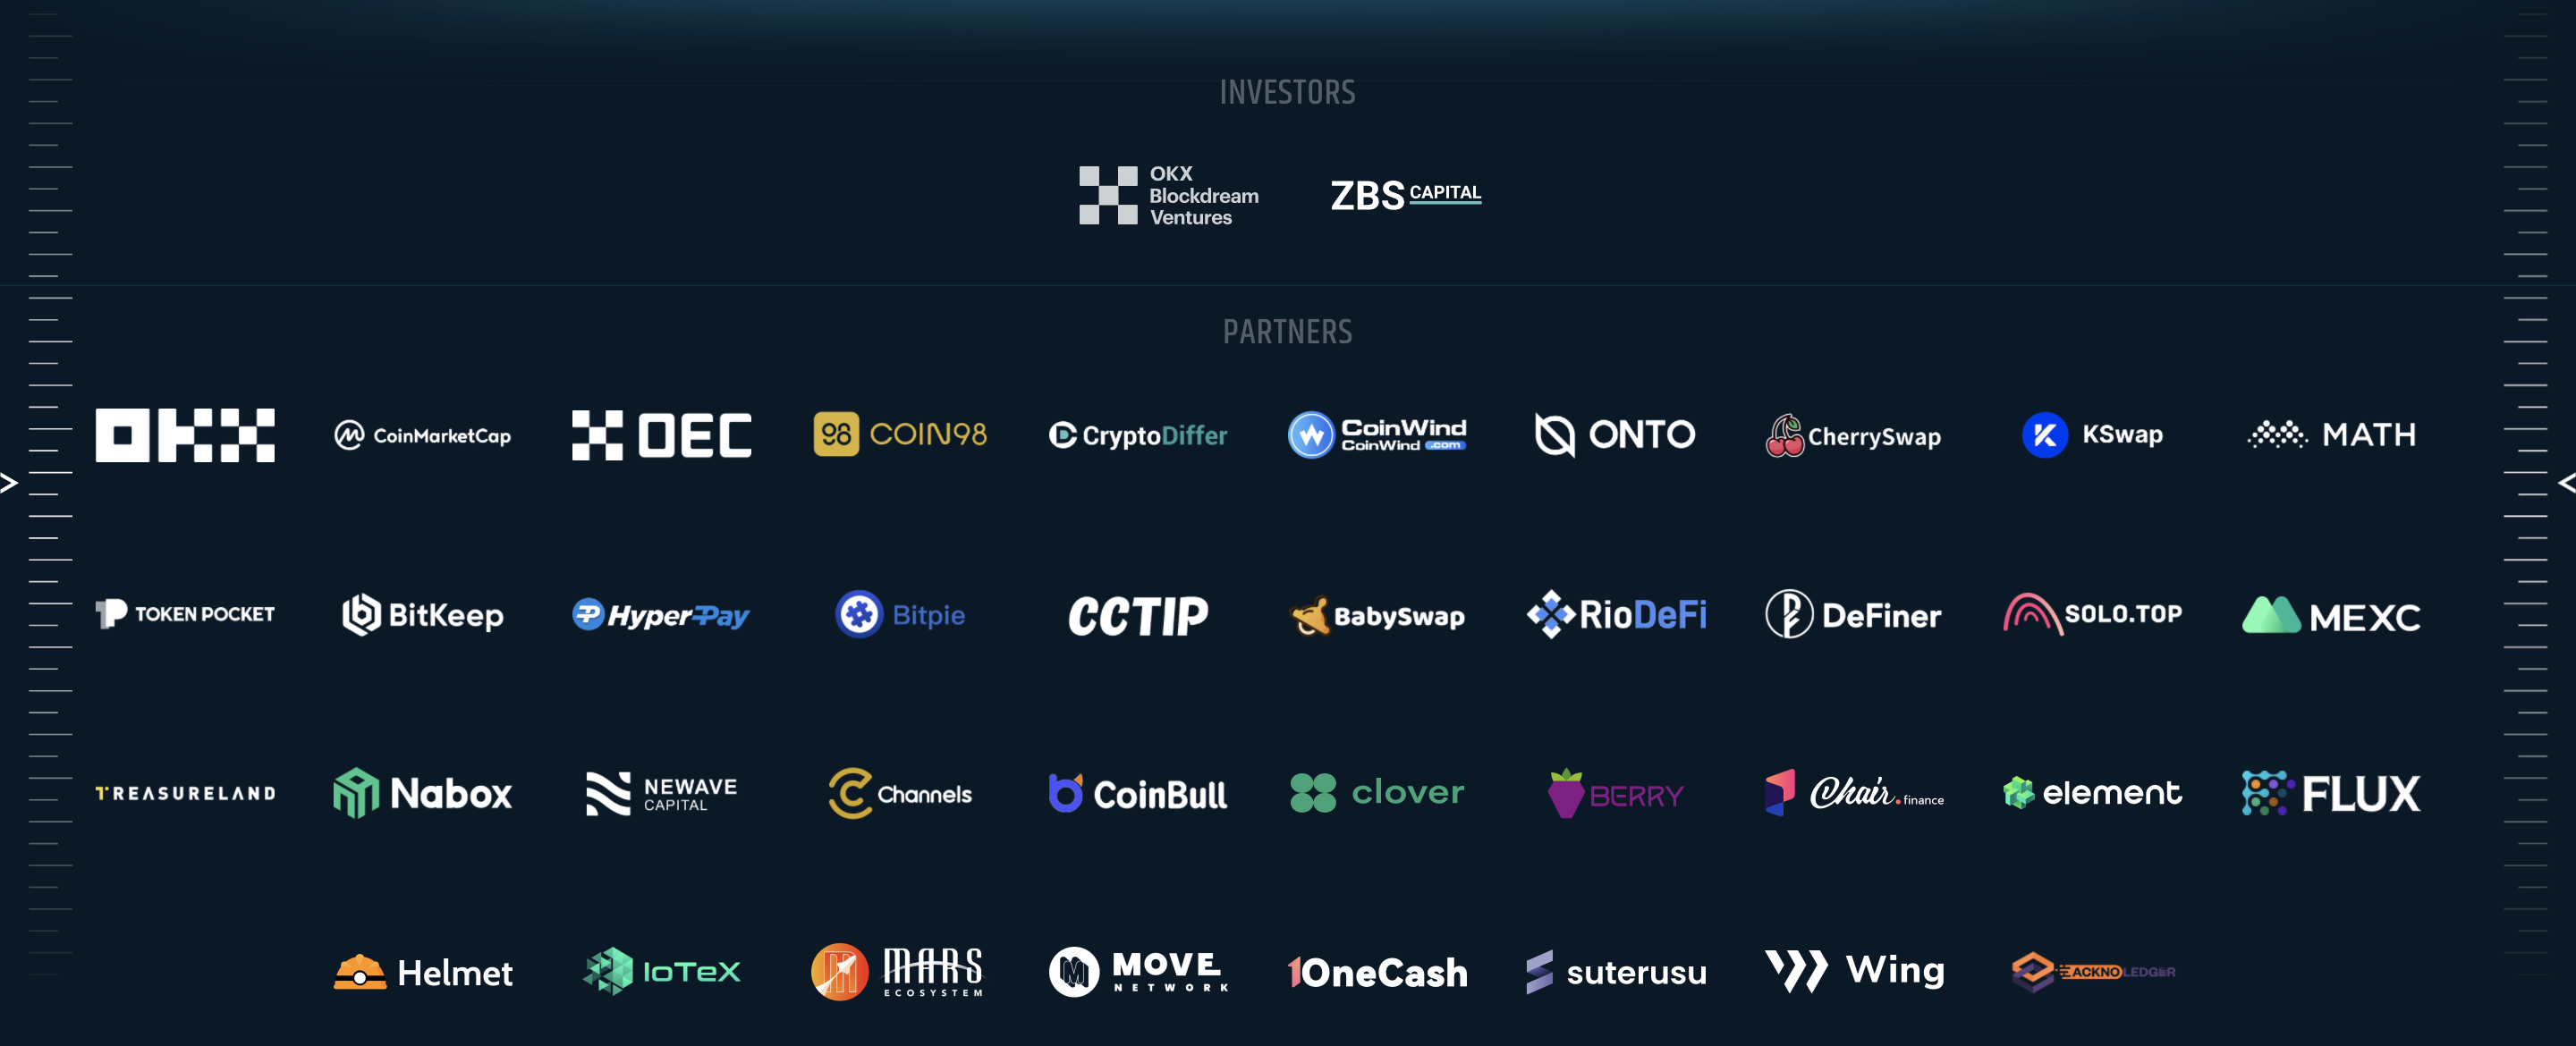 Celestial Investors and Partners